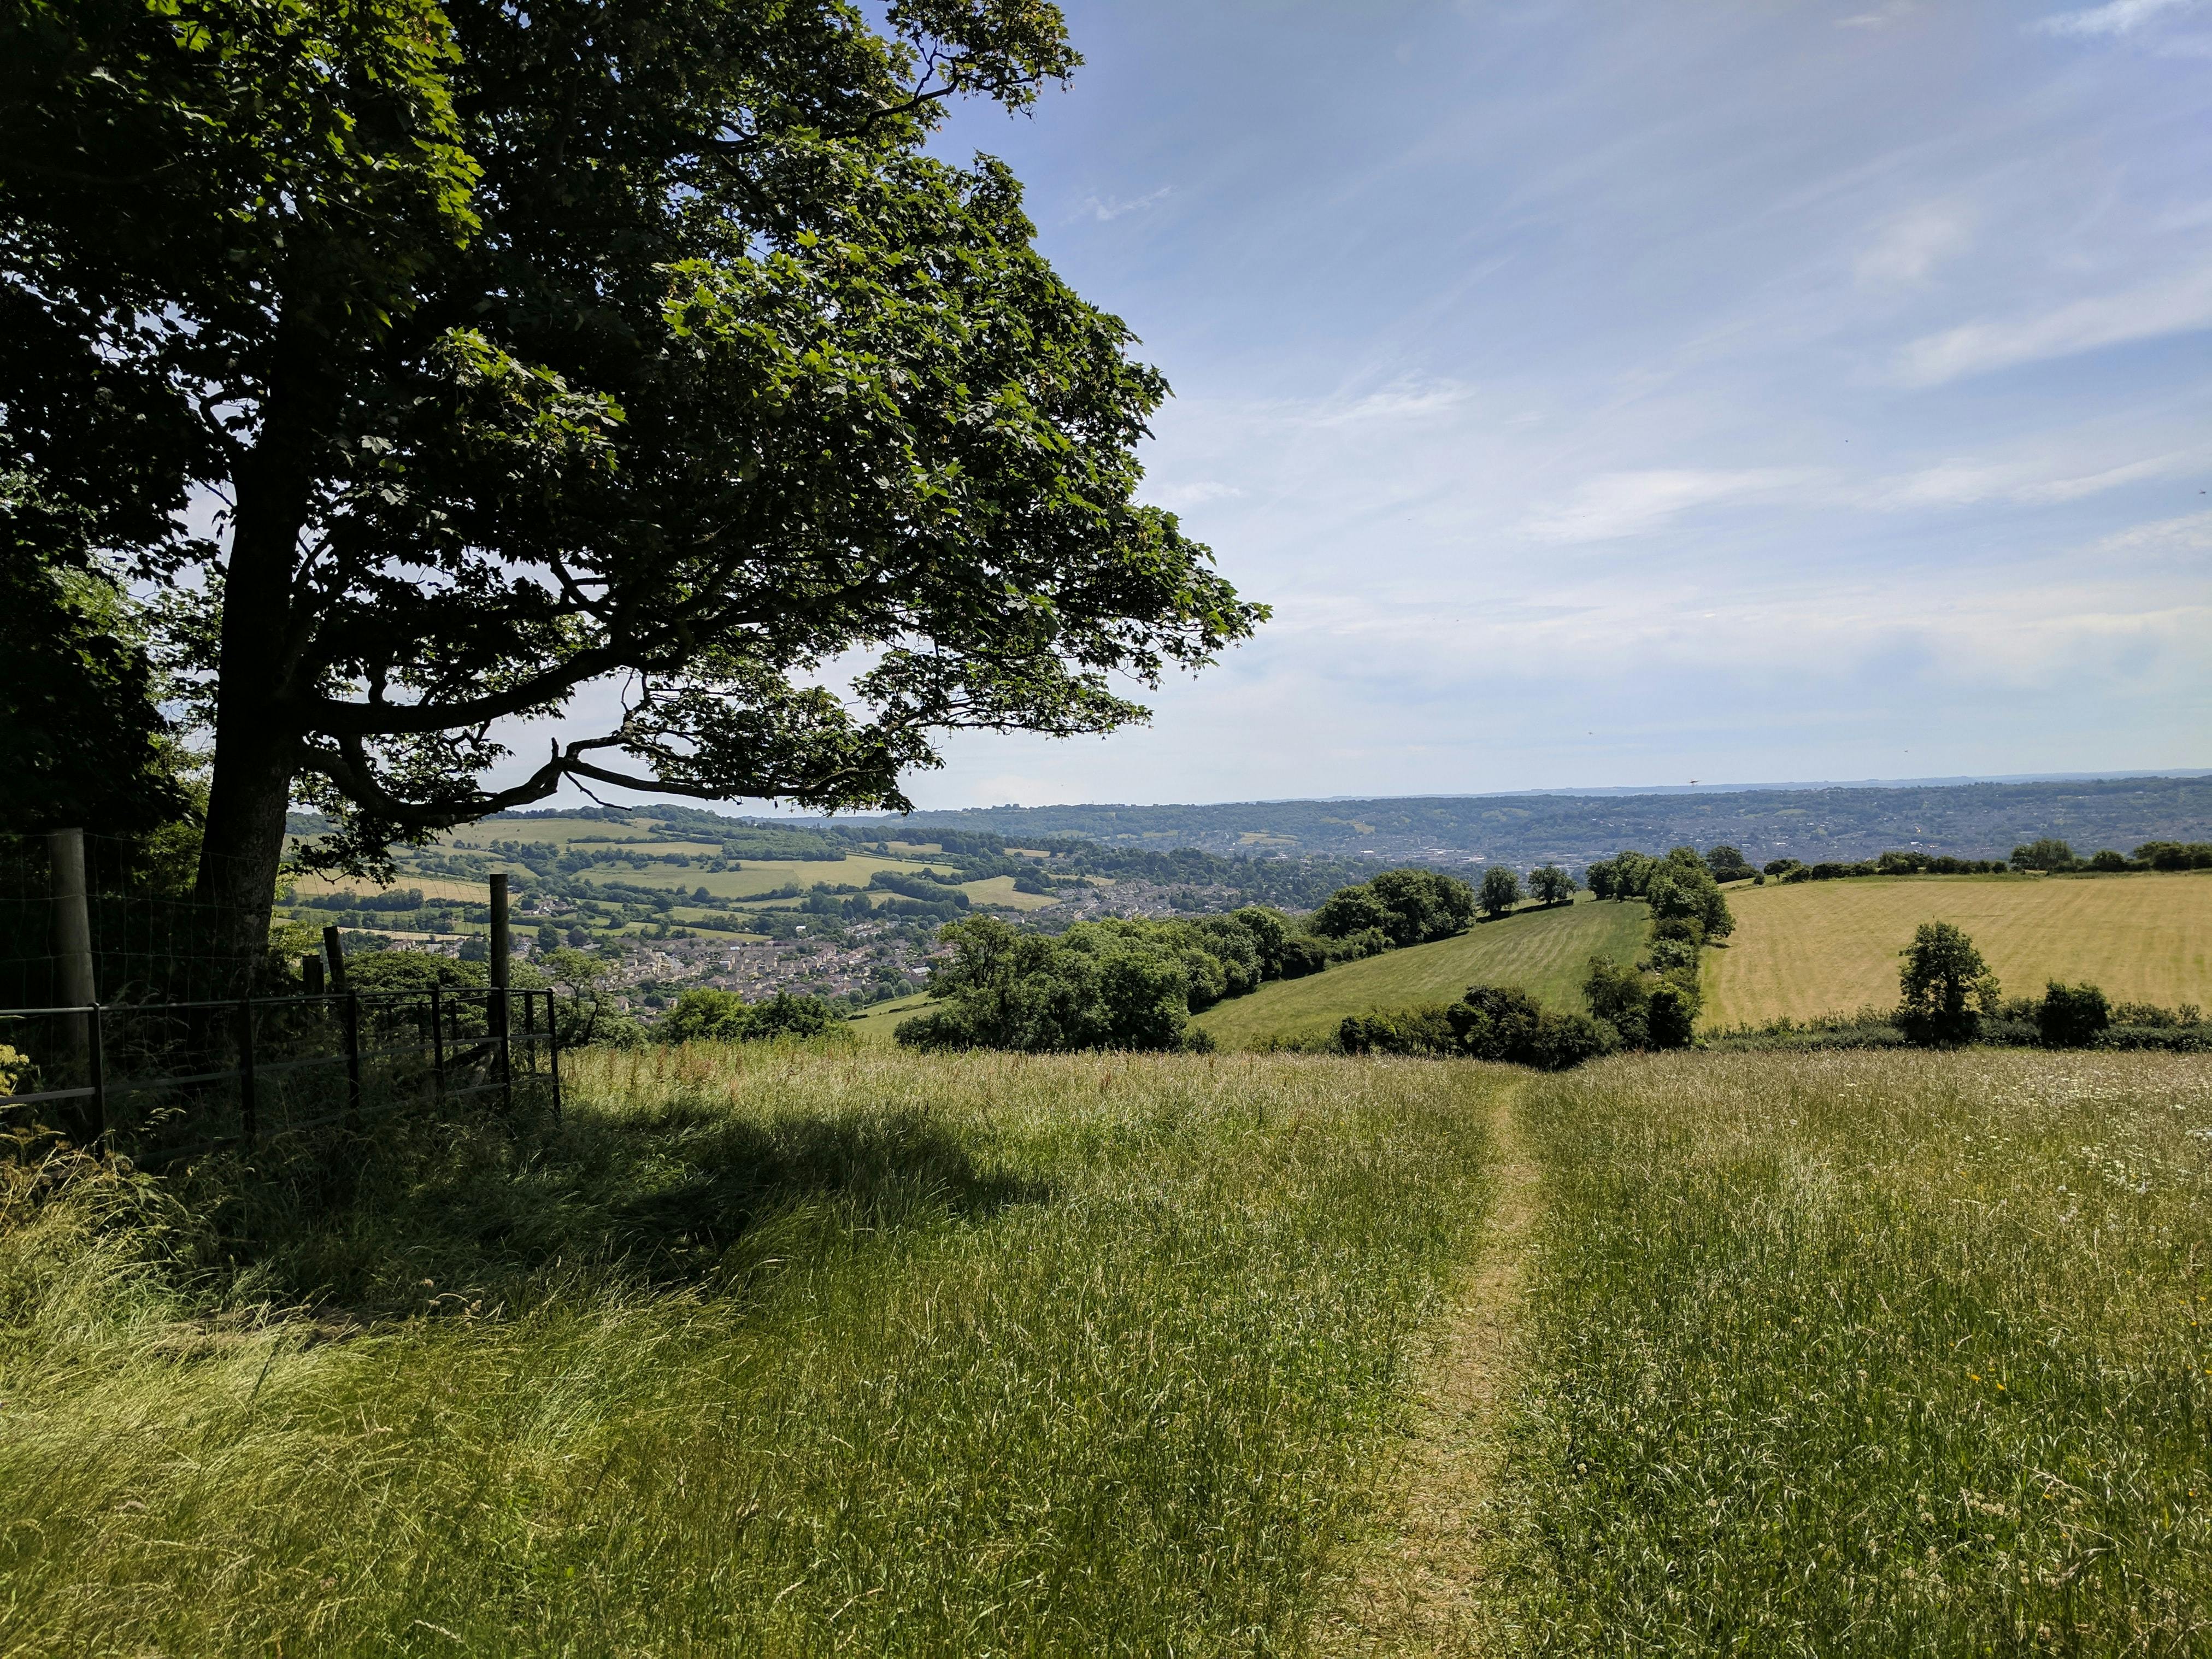 Best hikes in Bath